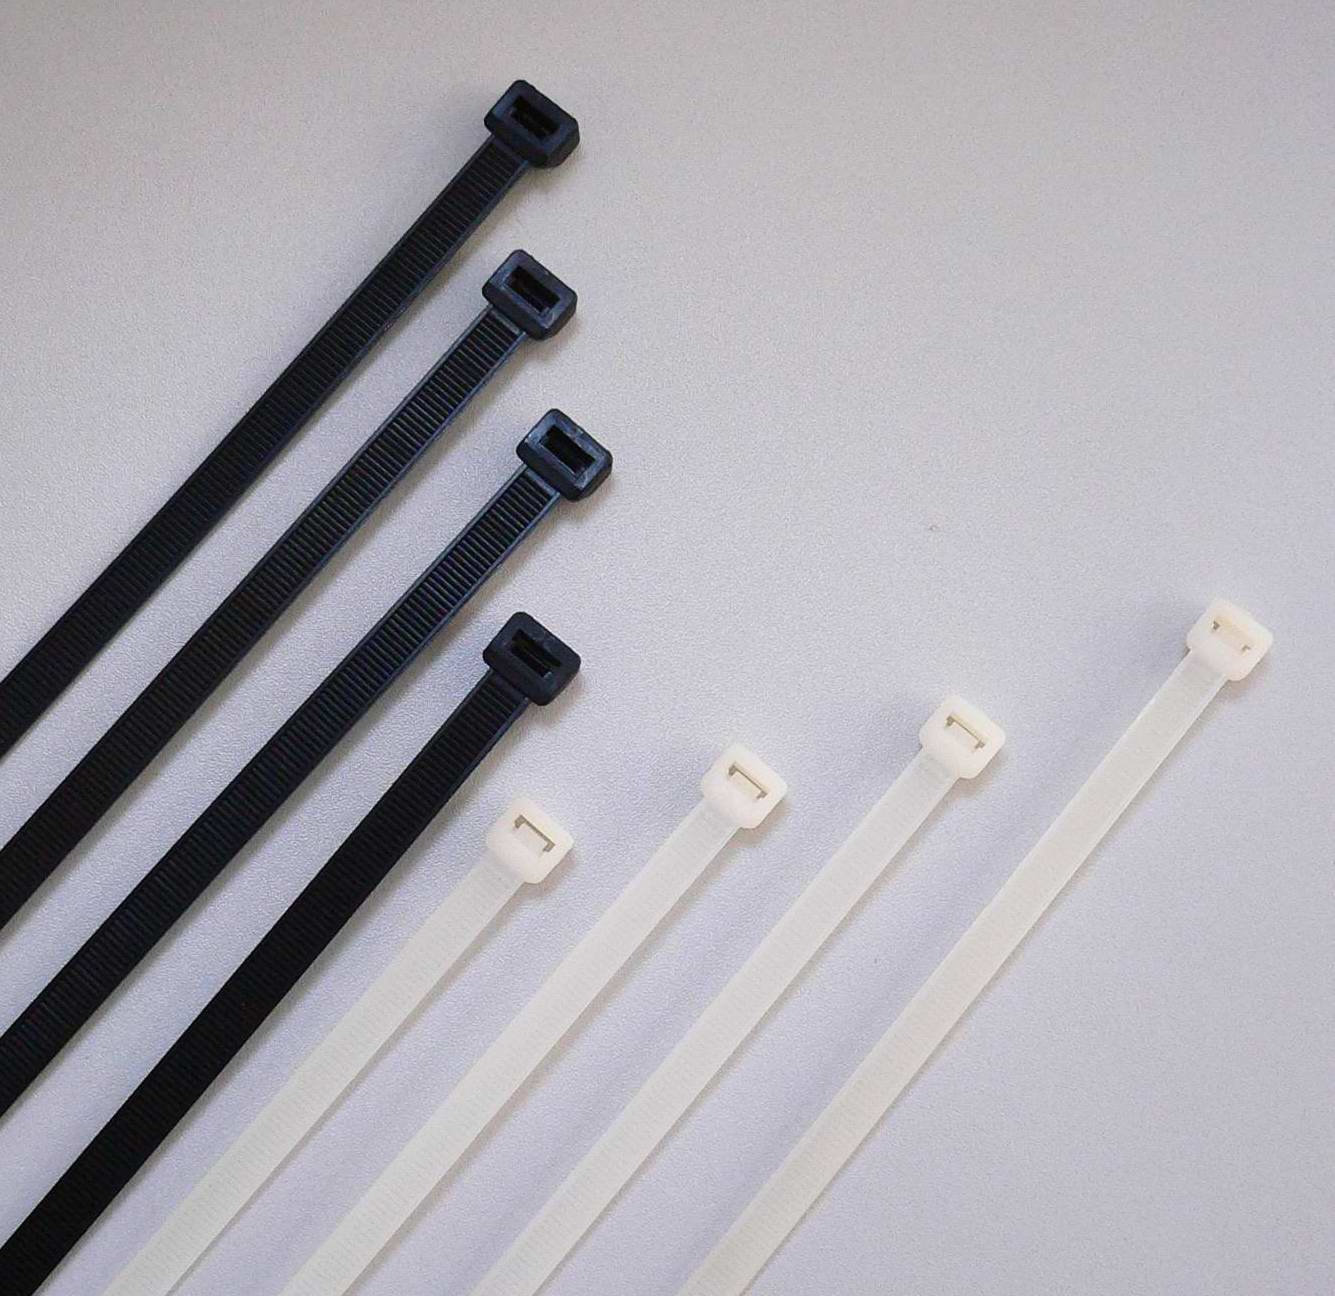  - Cable Ties